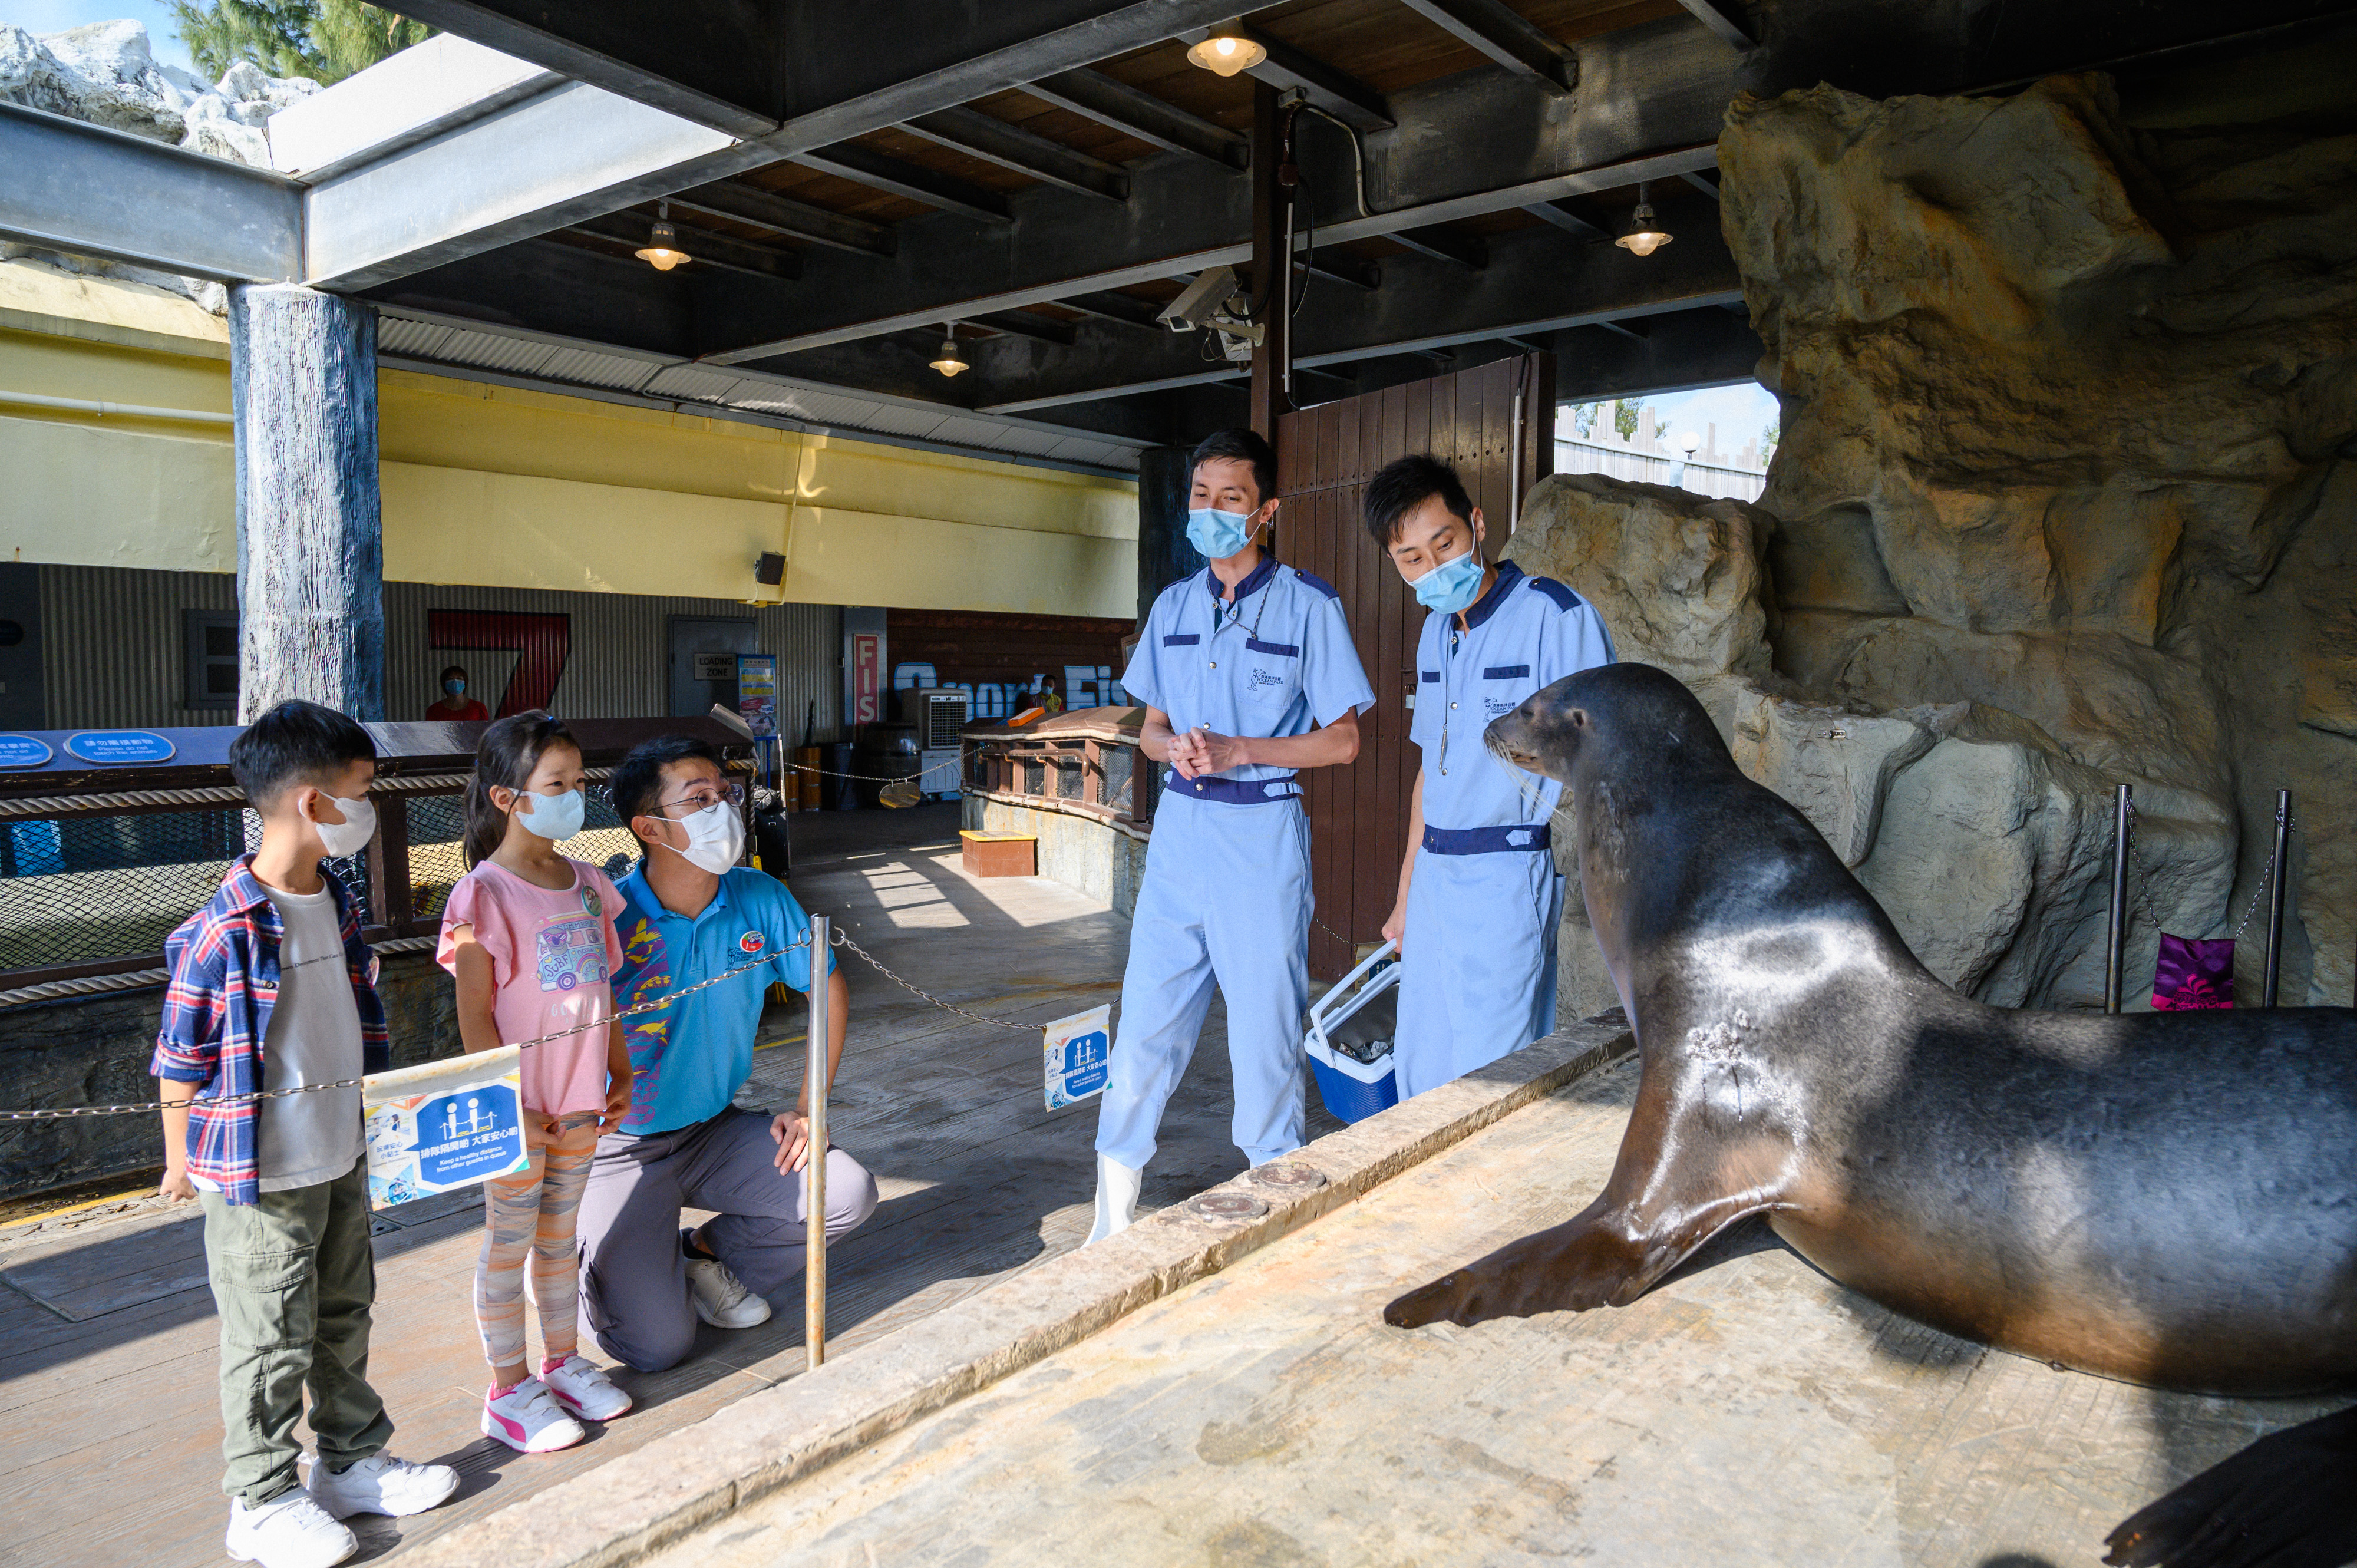 Join the educational demonstration of California sea lions